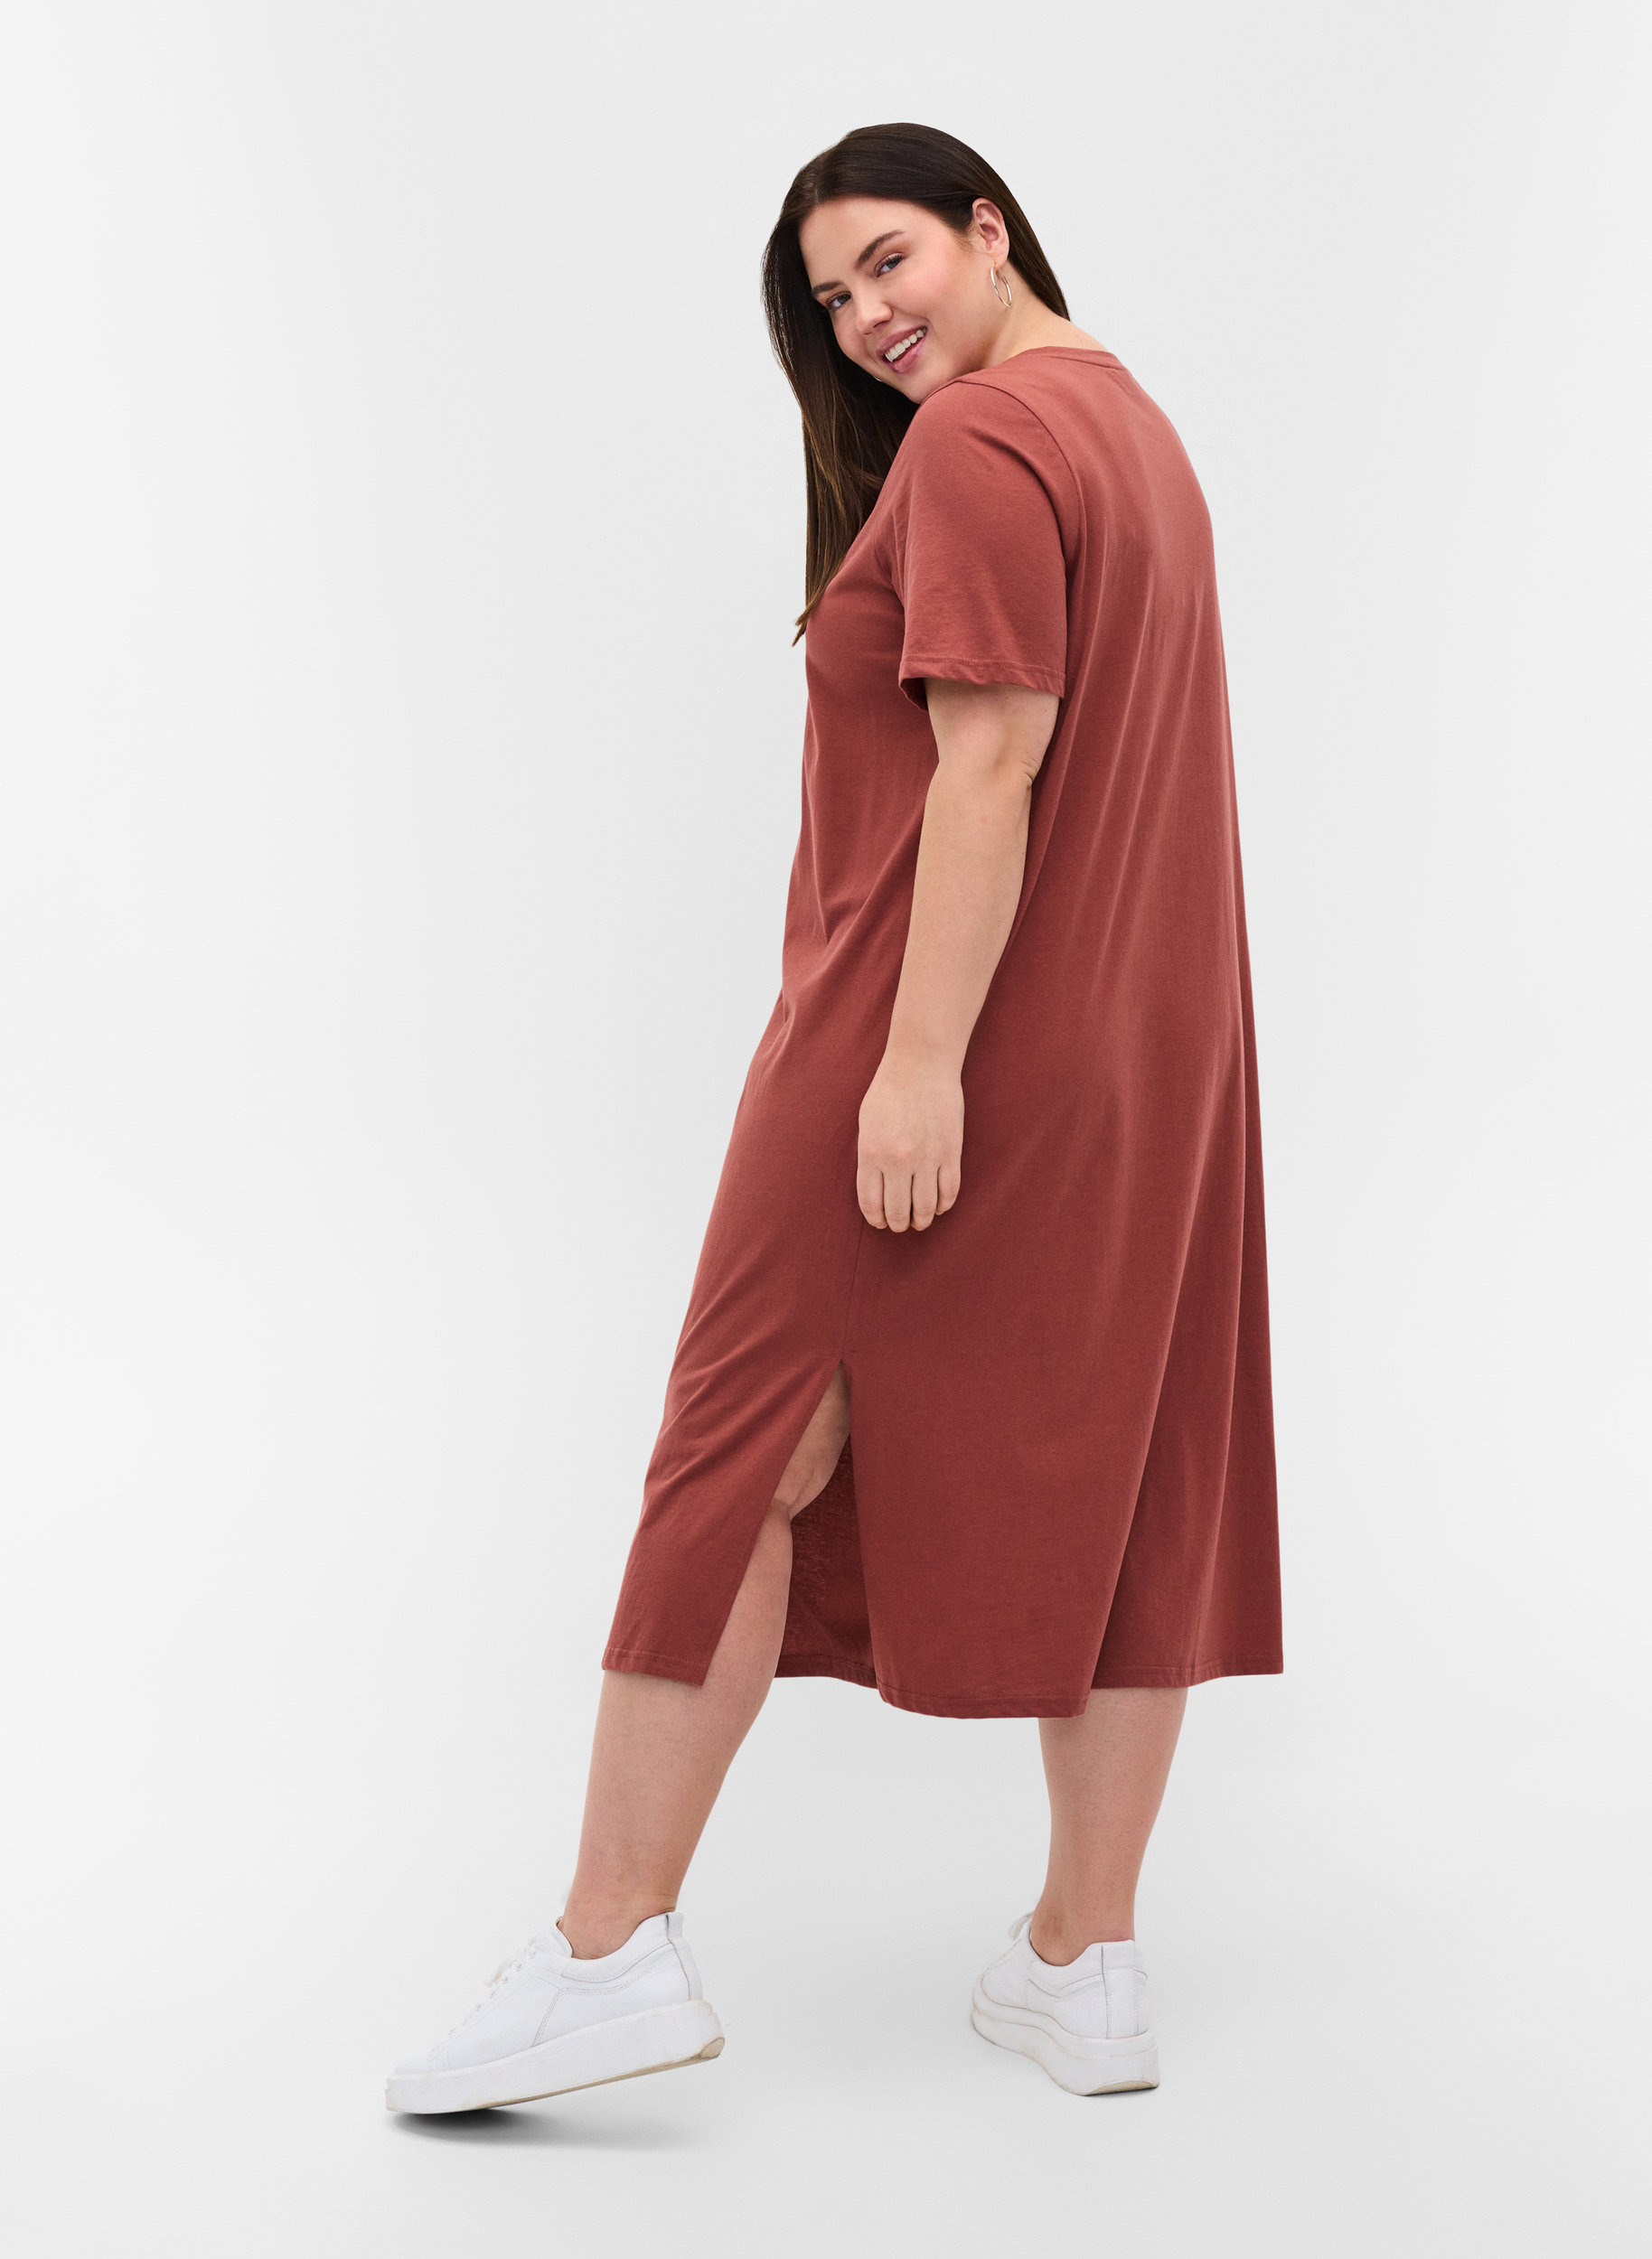 Cotton t-shirt dress with side slits ...